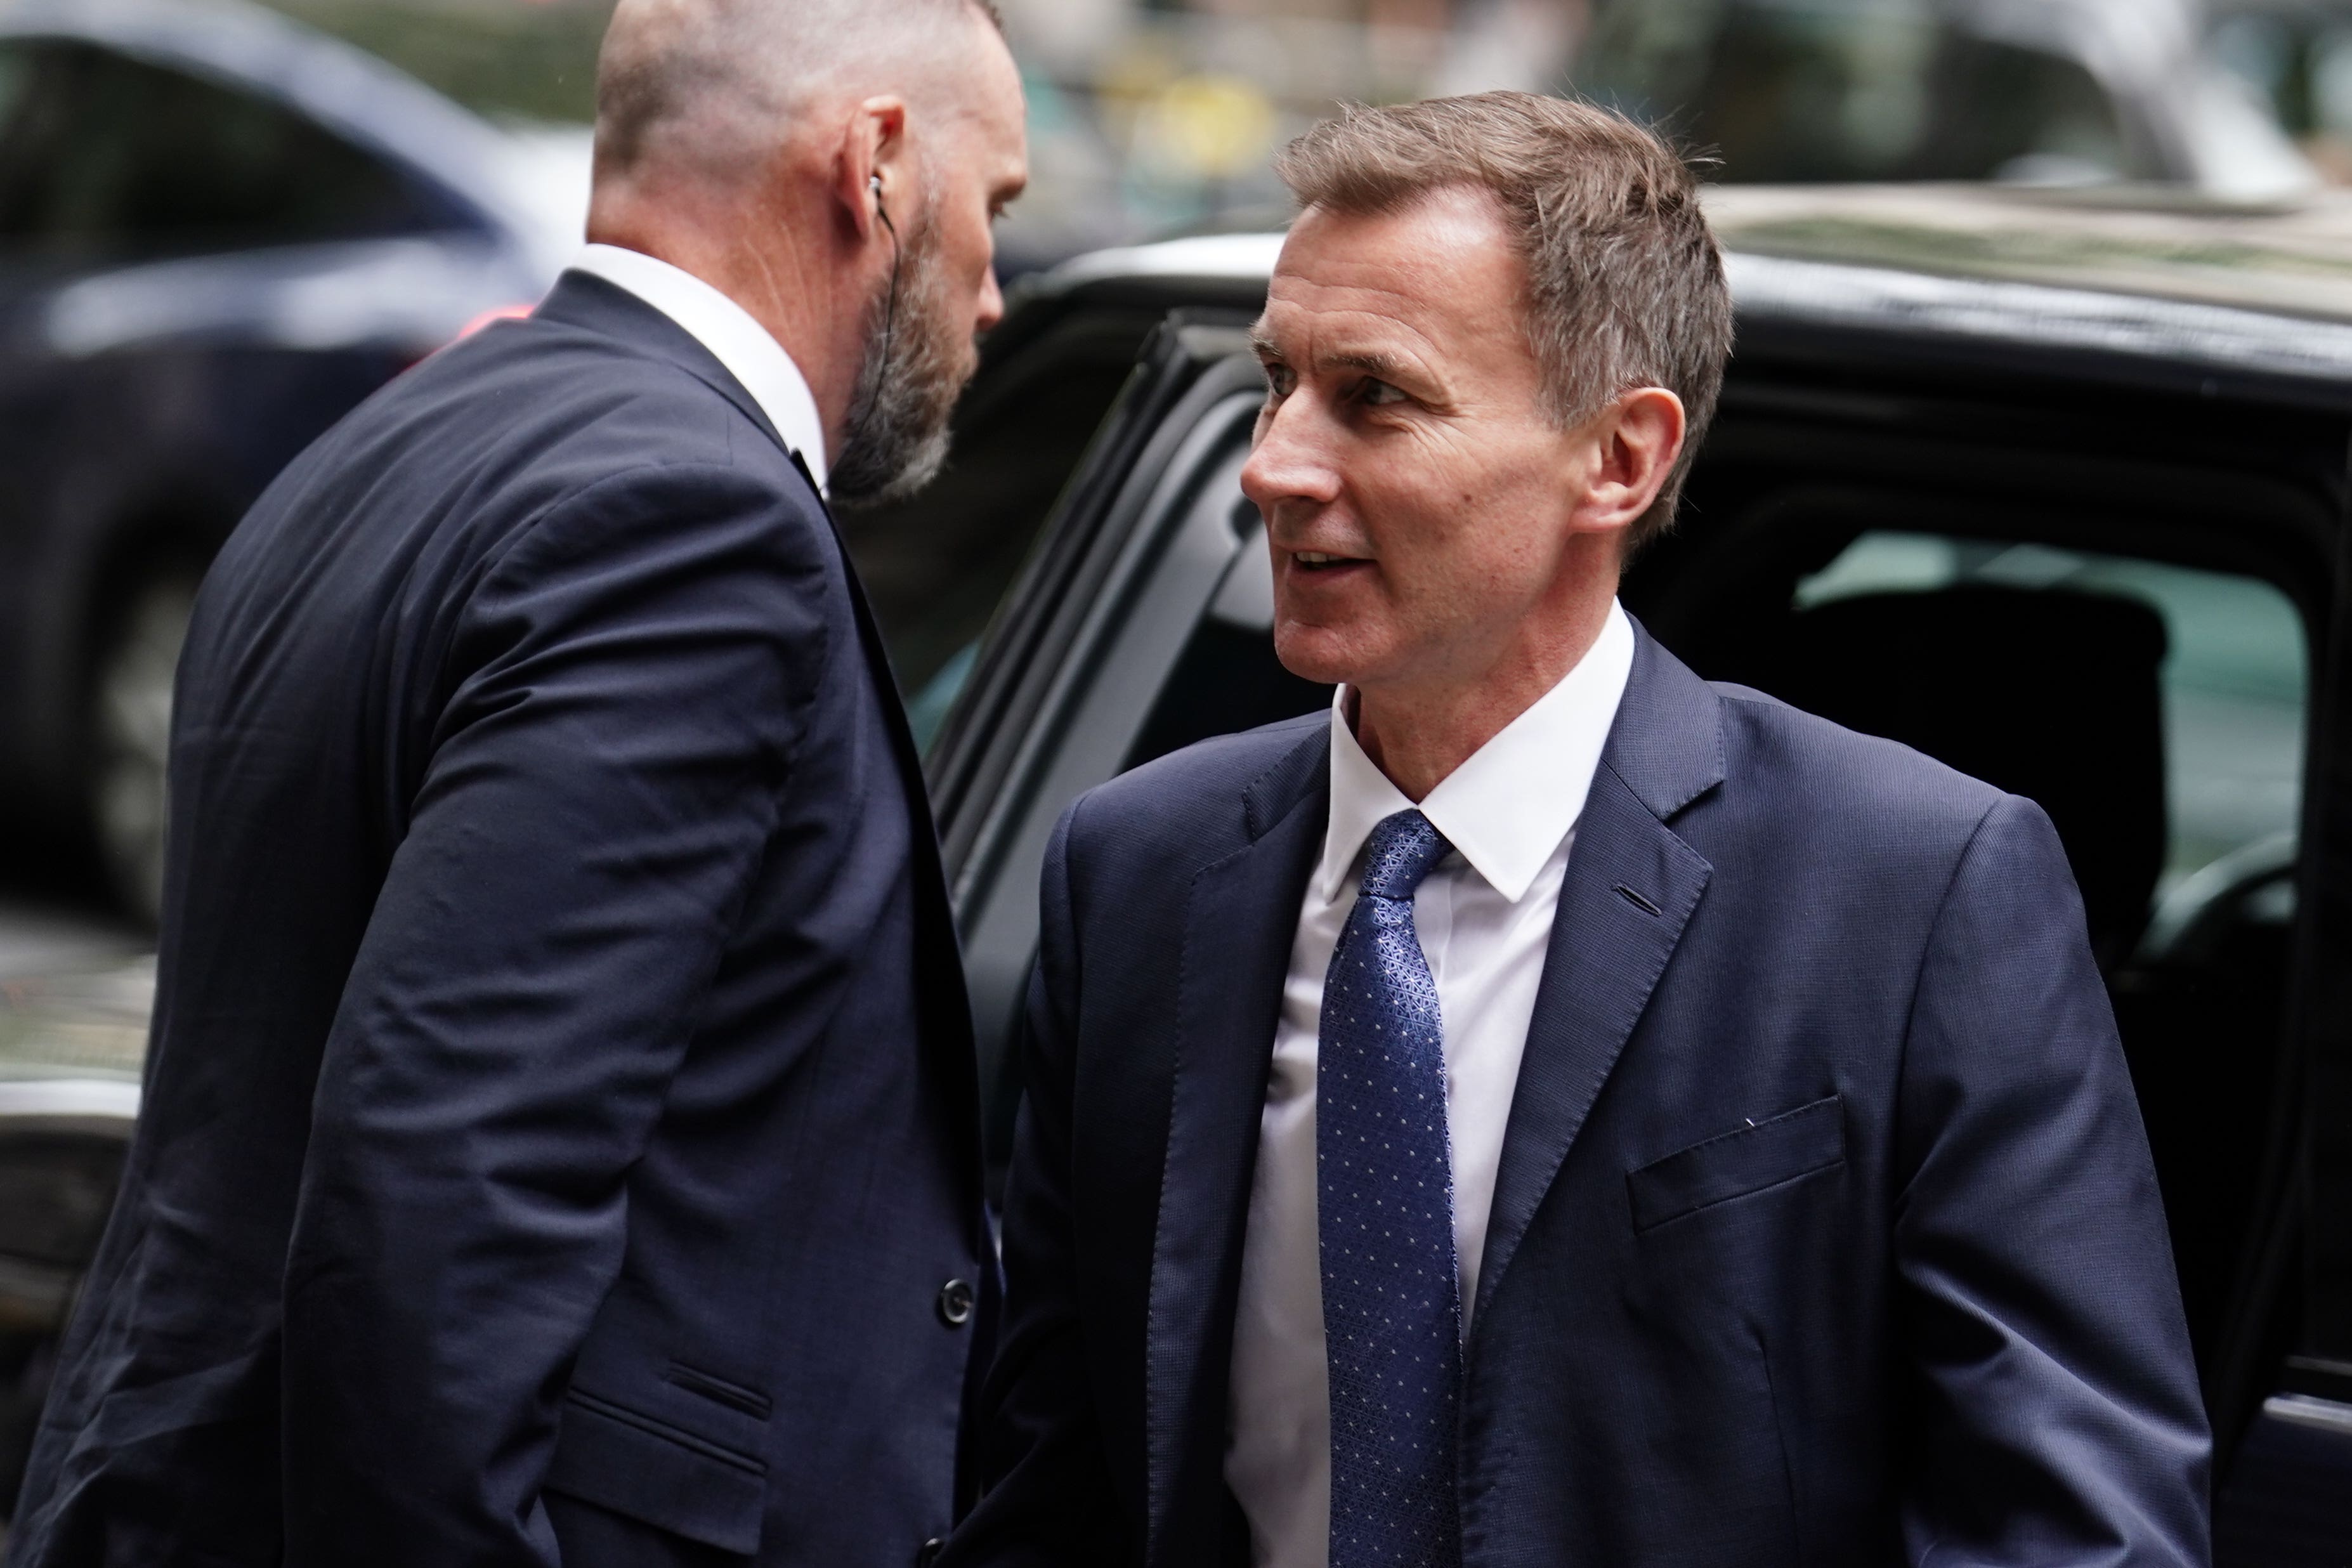 Chancellor of the exchequer Jeremy Hunt flew from Heathrow to Manchester (Jordan Pettitt/PA)